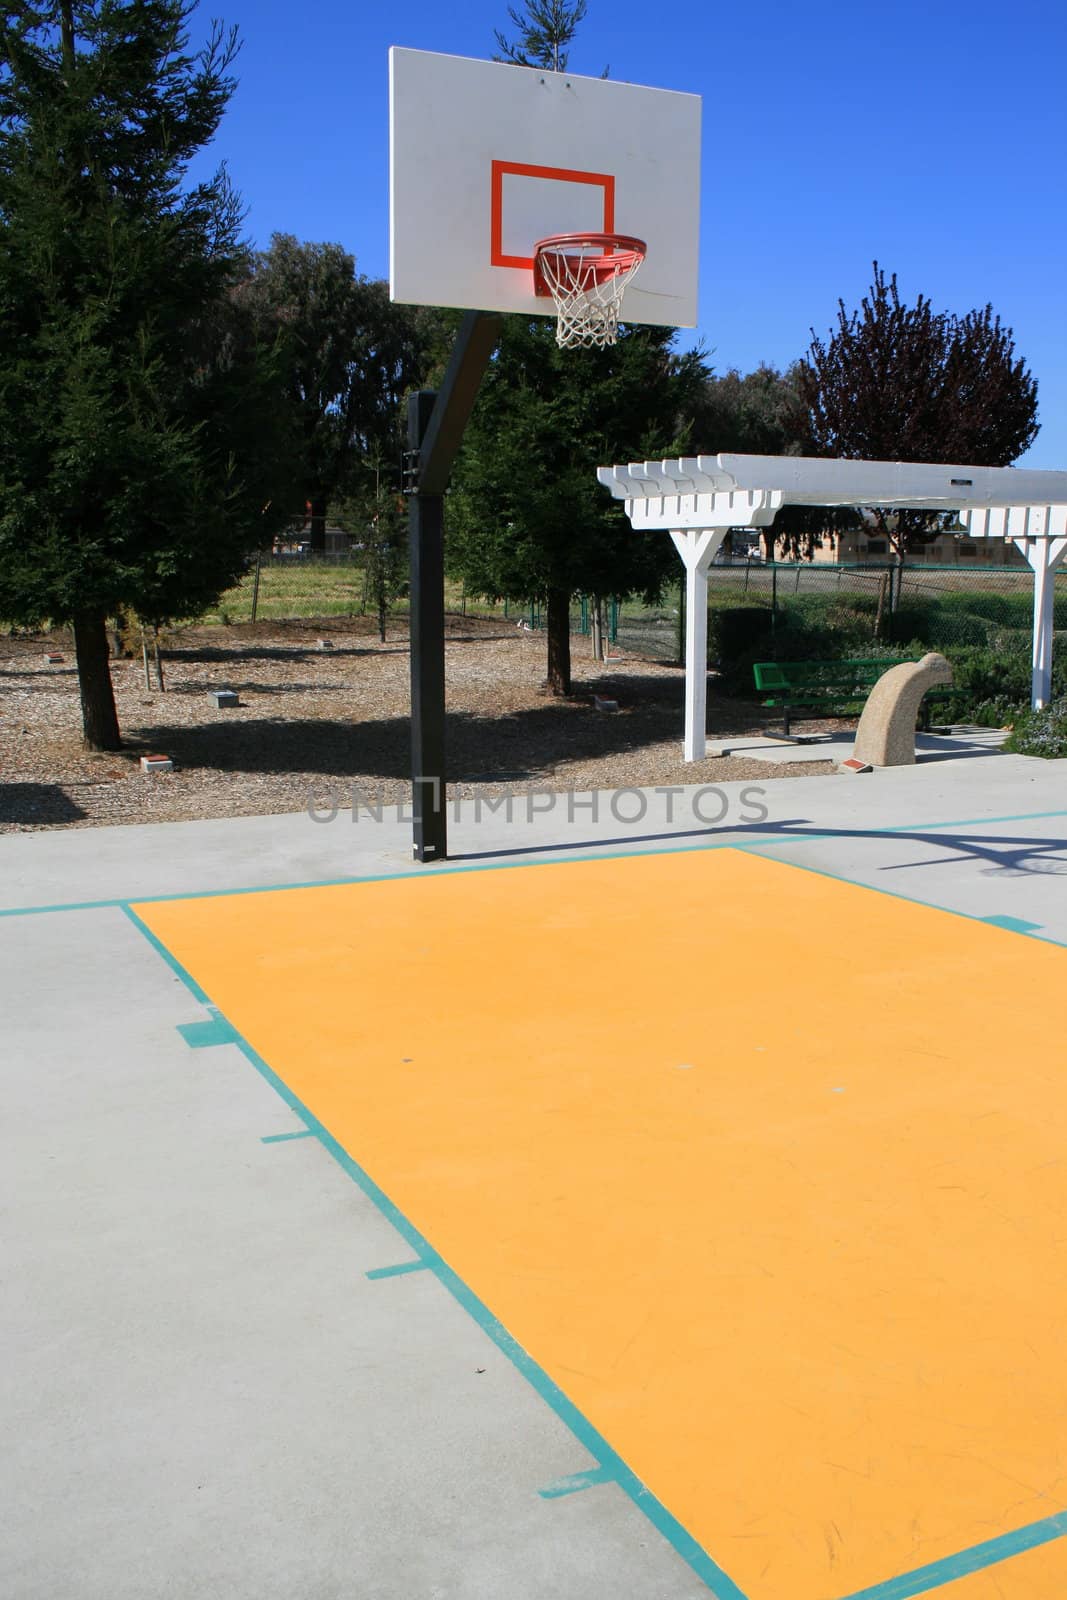 Basketball court on a sunny day in a park.
